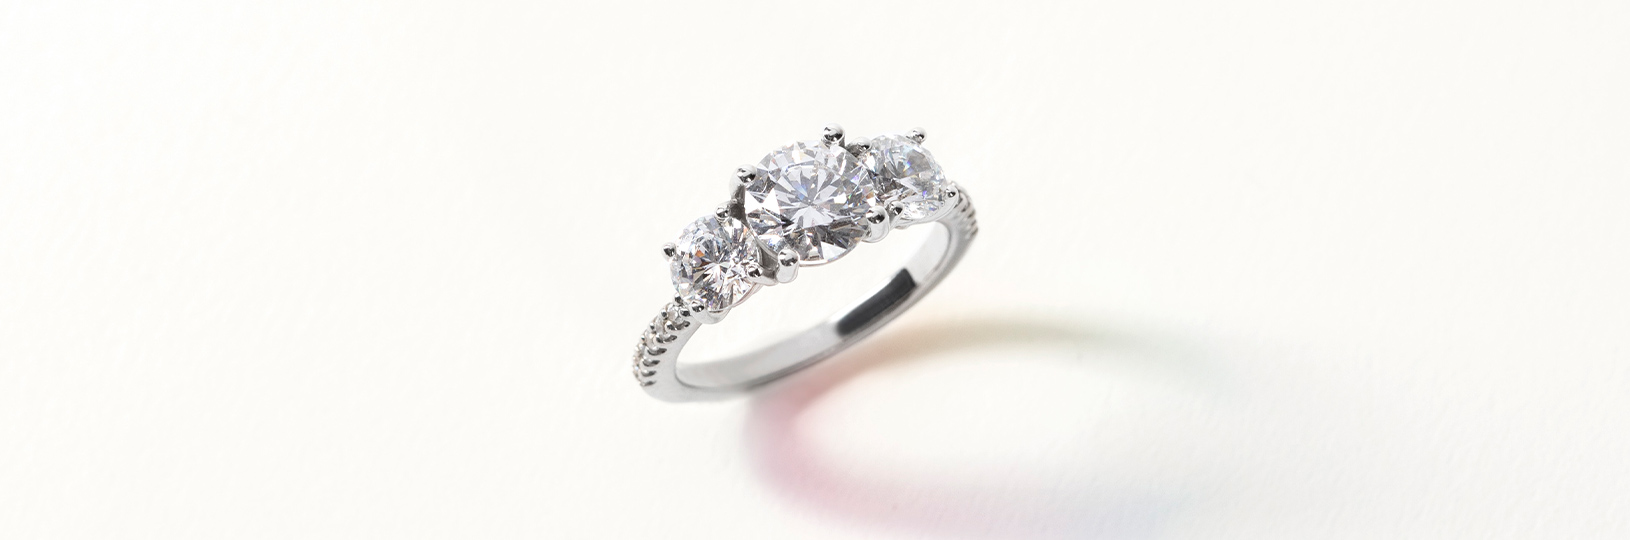 Three stone accented setting featuring round cut simulated diamonds